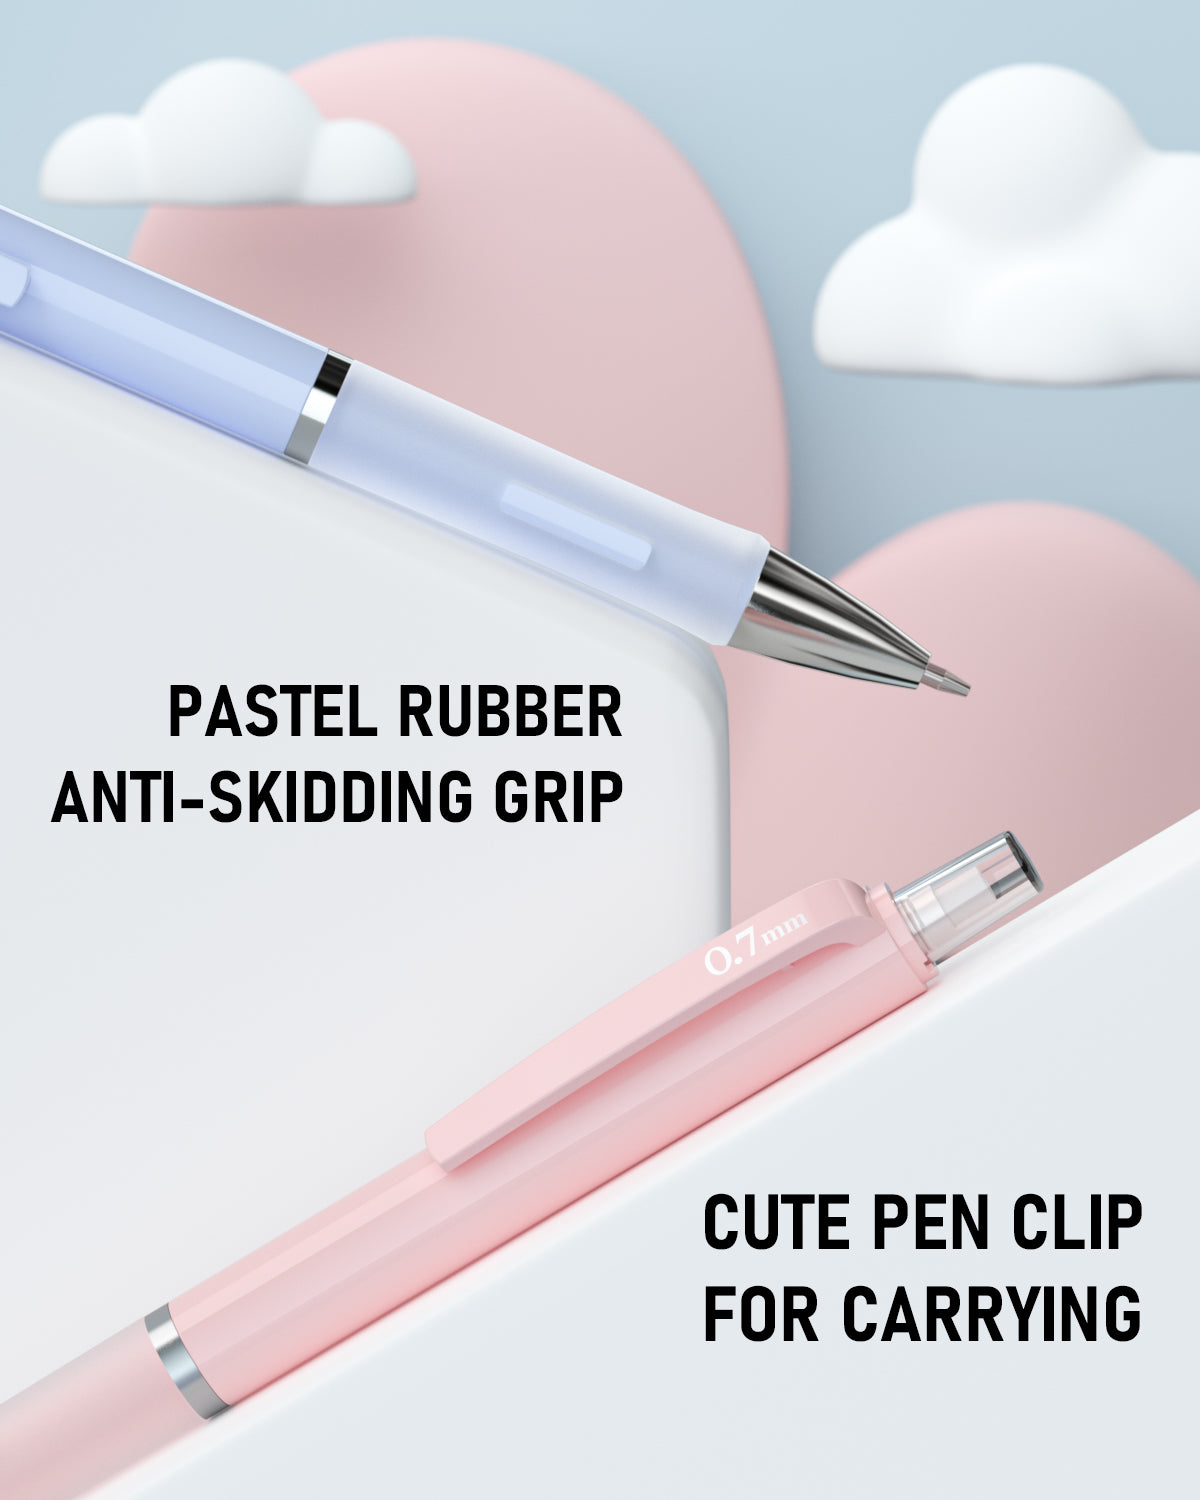 Nicpro 3 Pcs 0.7mm Pastel Mechanical Pencils, with 6 tubes HB Lead Refills, Erasers, Eraser Refills - Come with Case